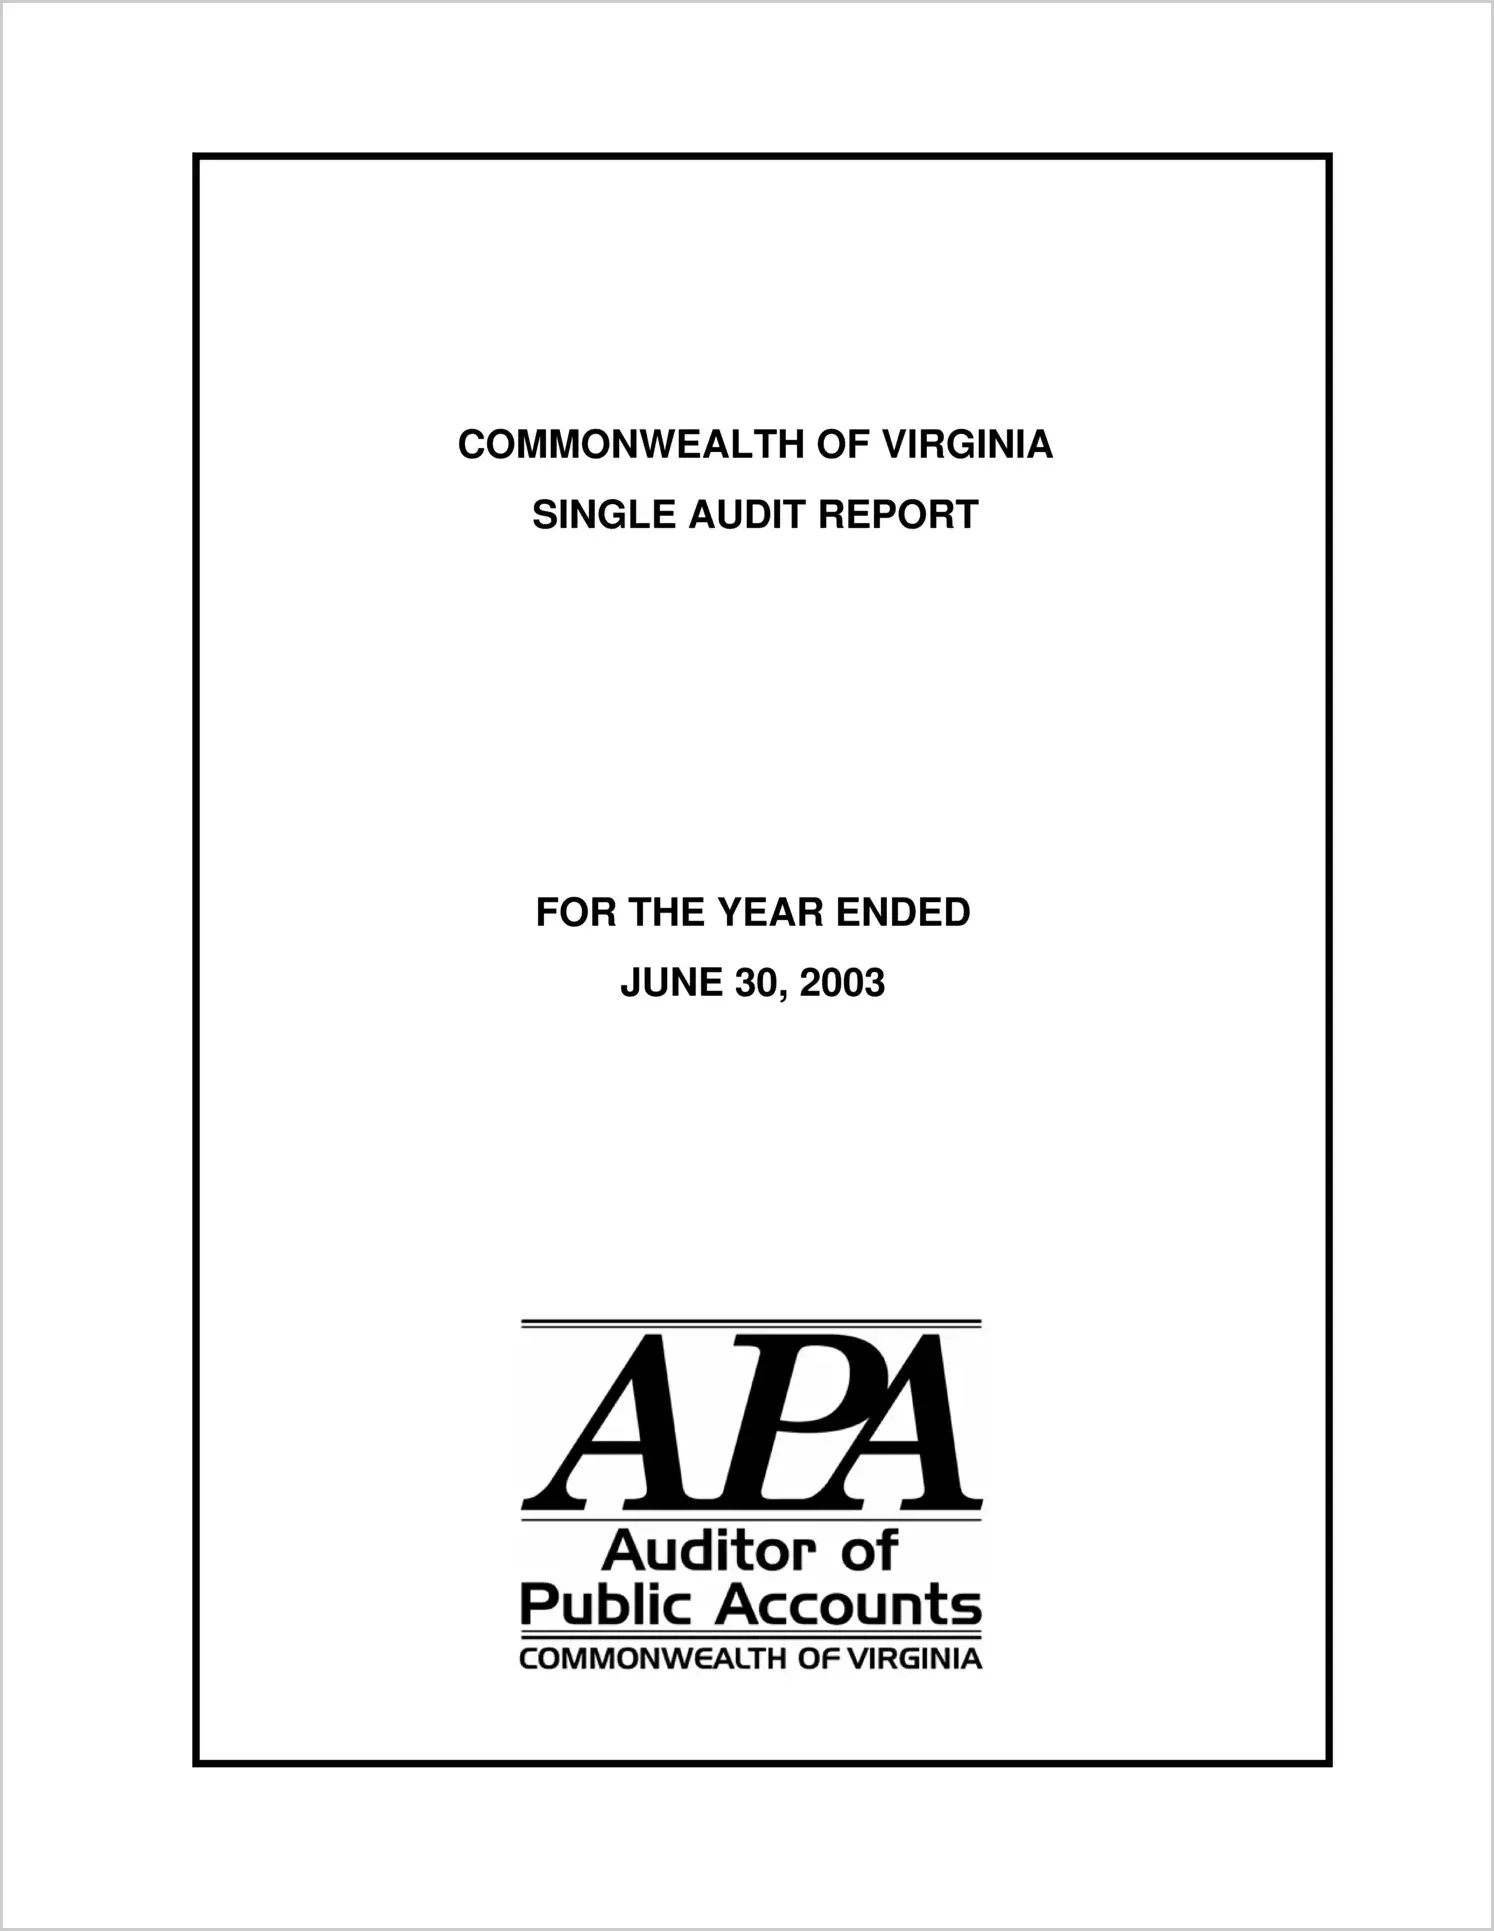 Commonwealth of Virginia Single Audit Report for the Year Ended June 30, 2003